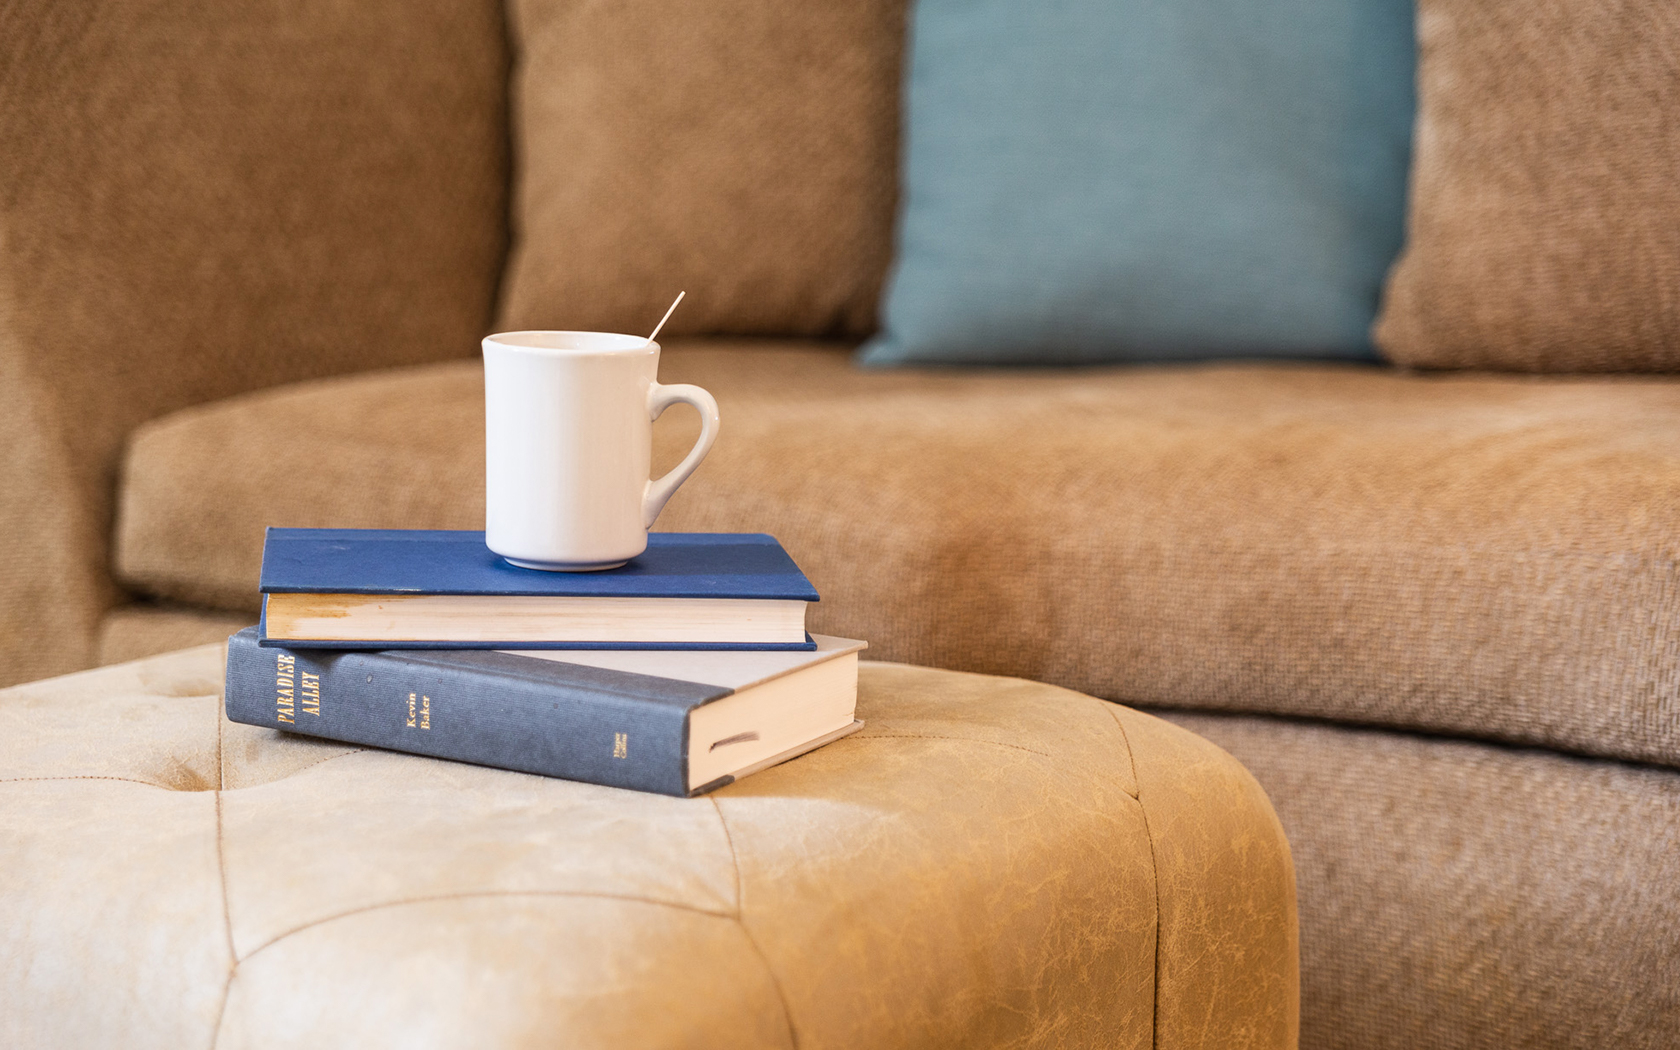  View of two books and a coffee cup on top 